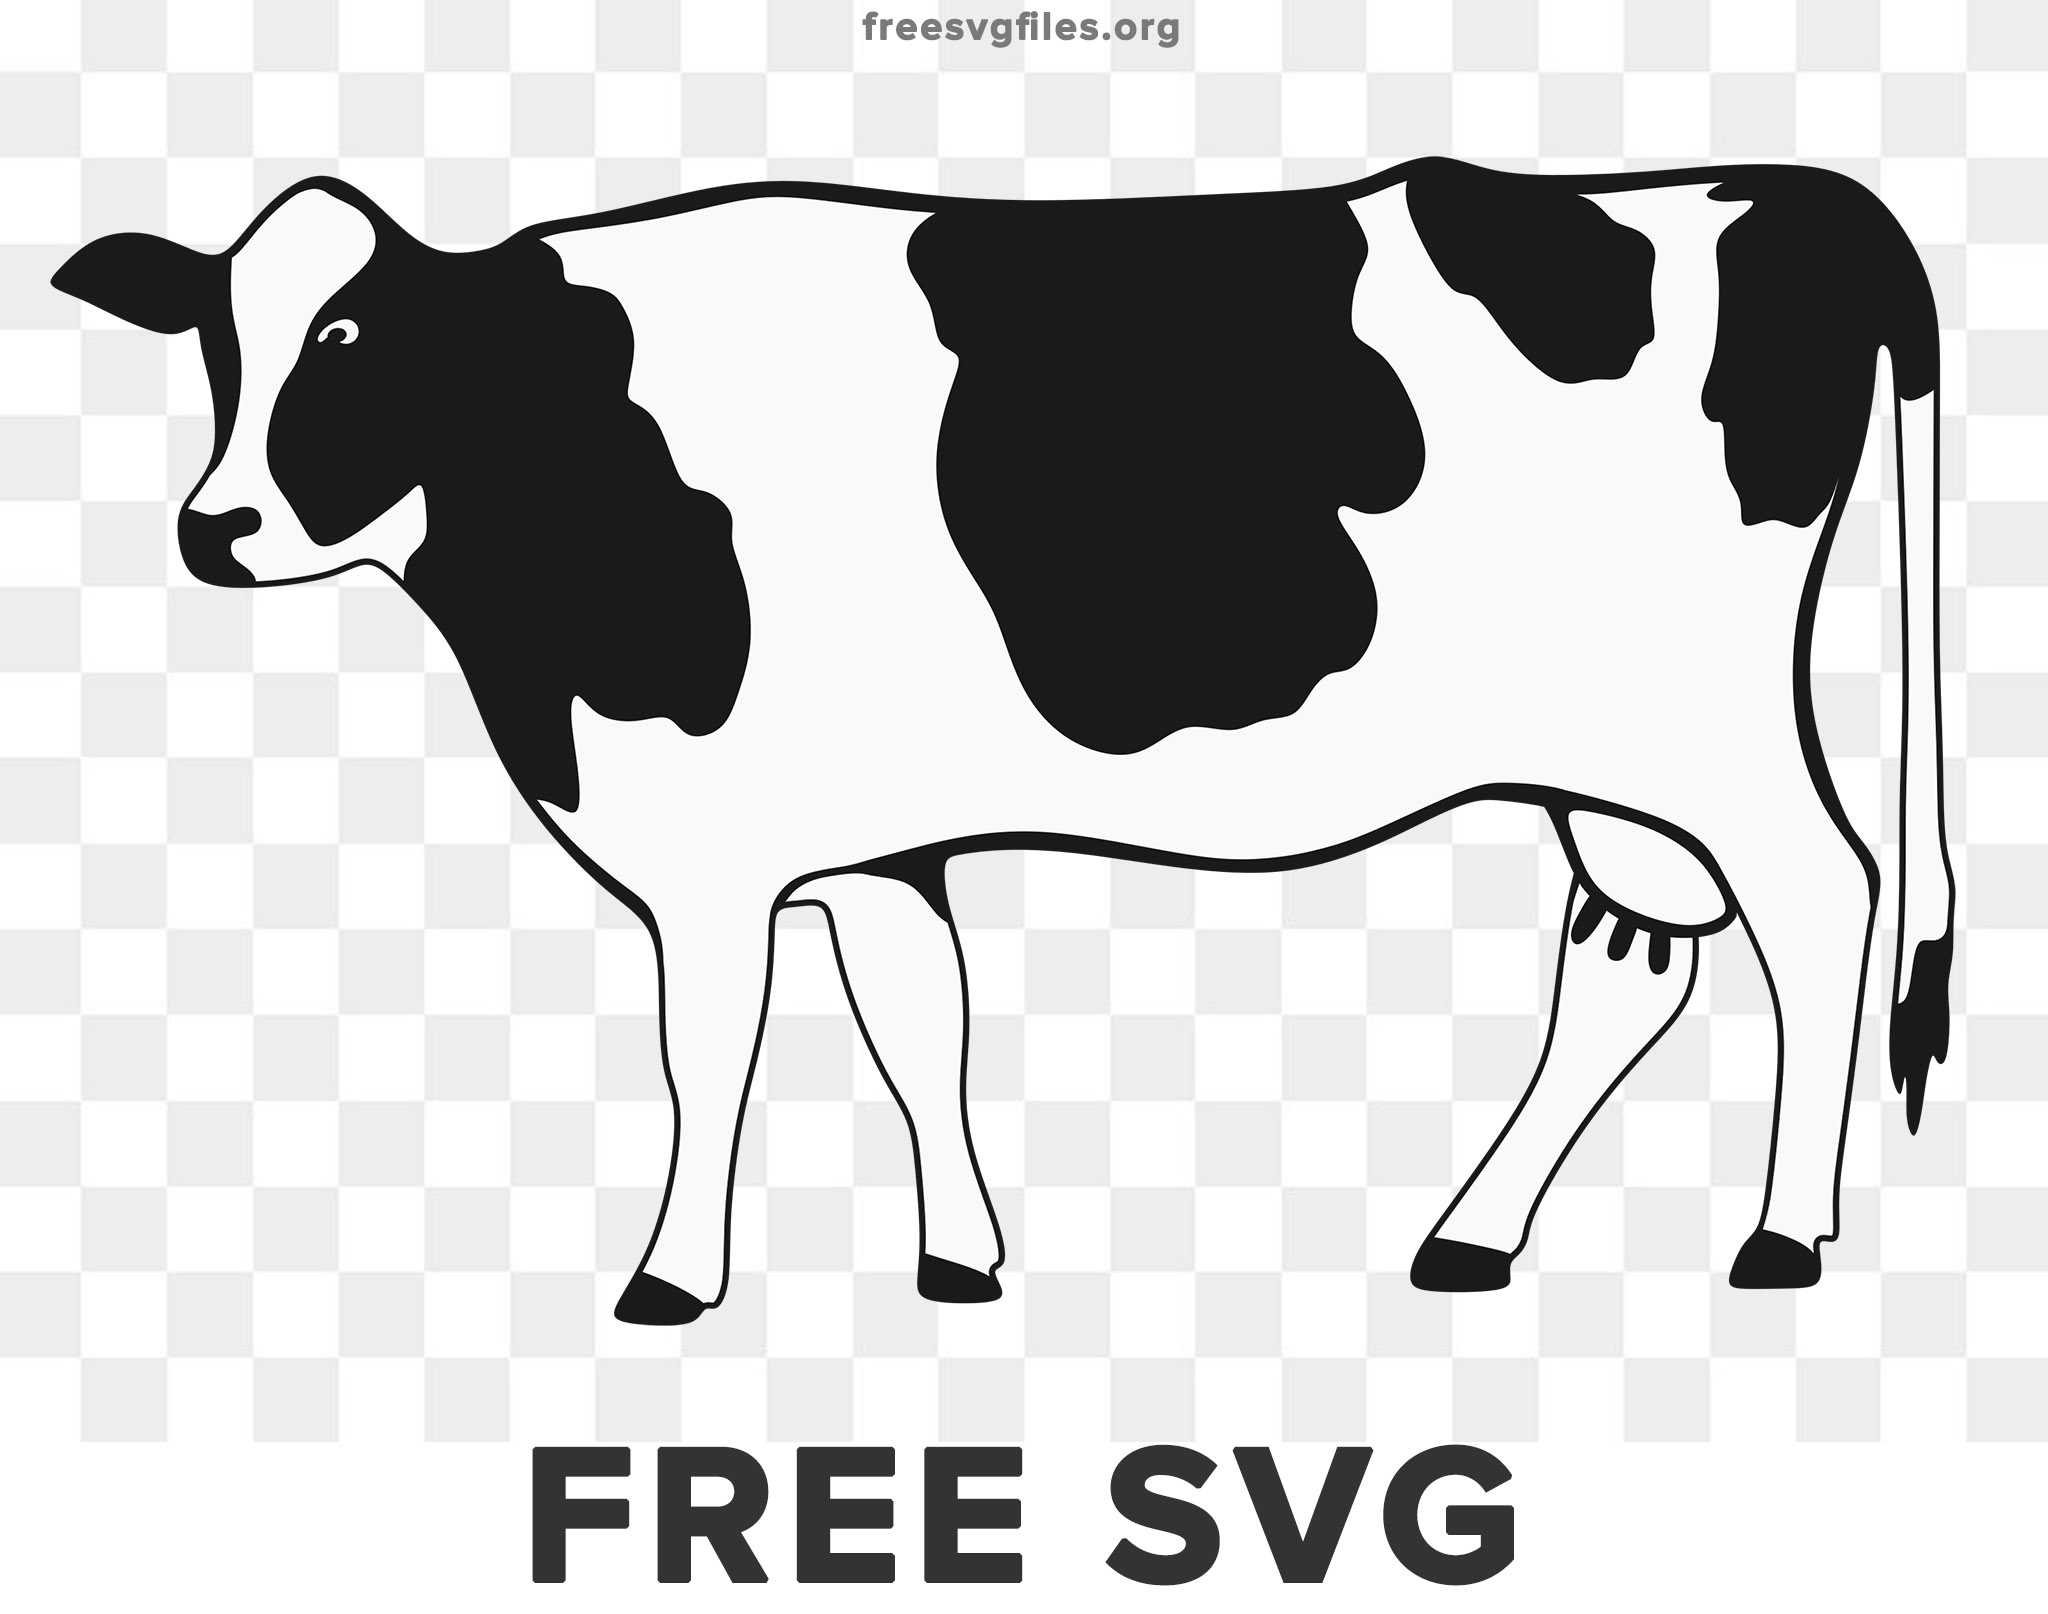 Download Free Cow Silhouette Svg Free Svg Files